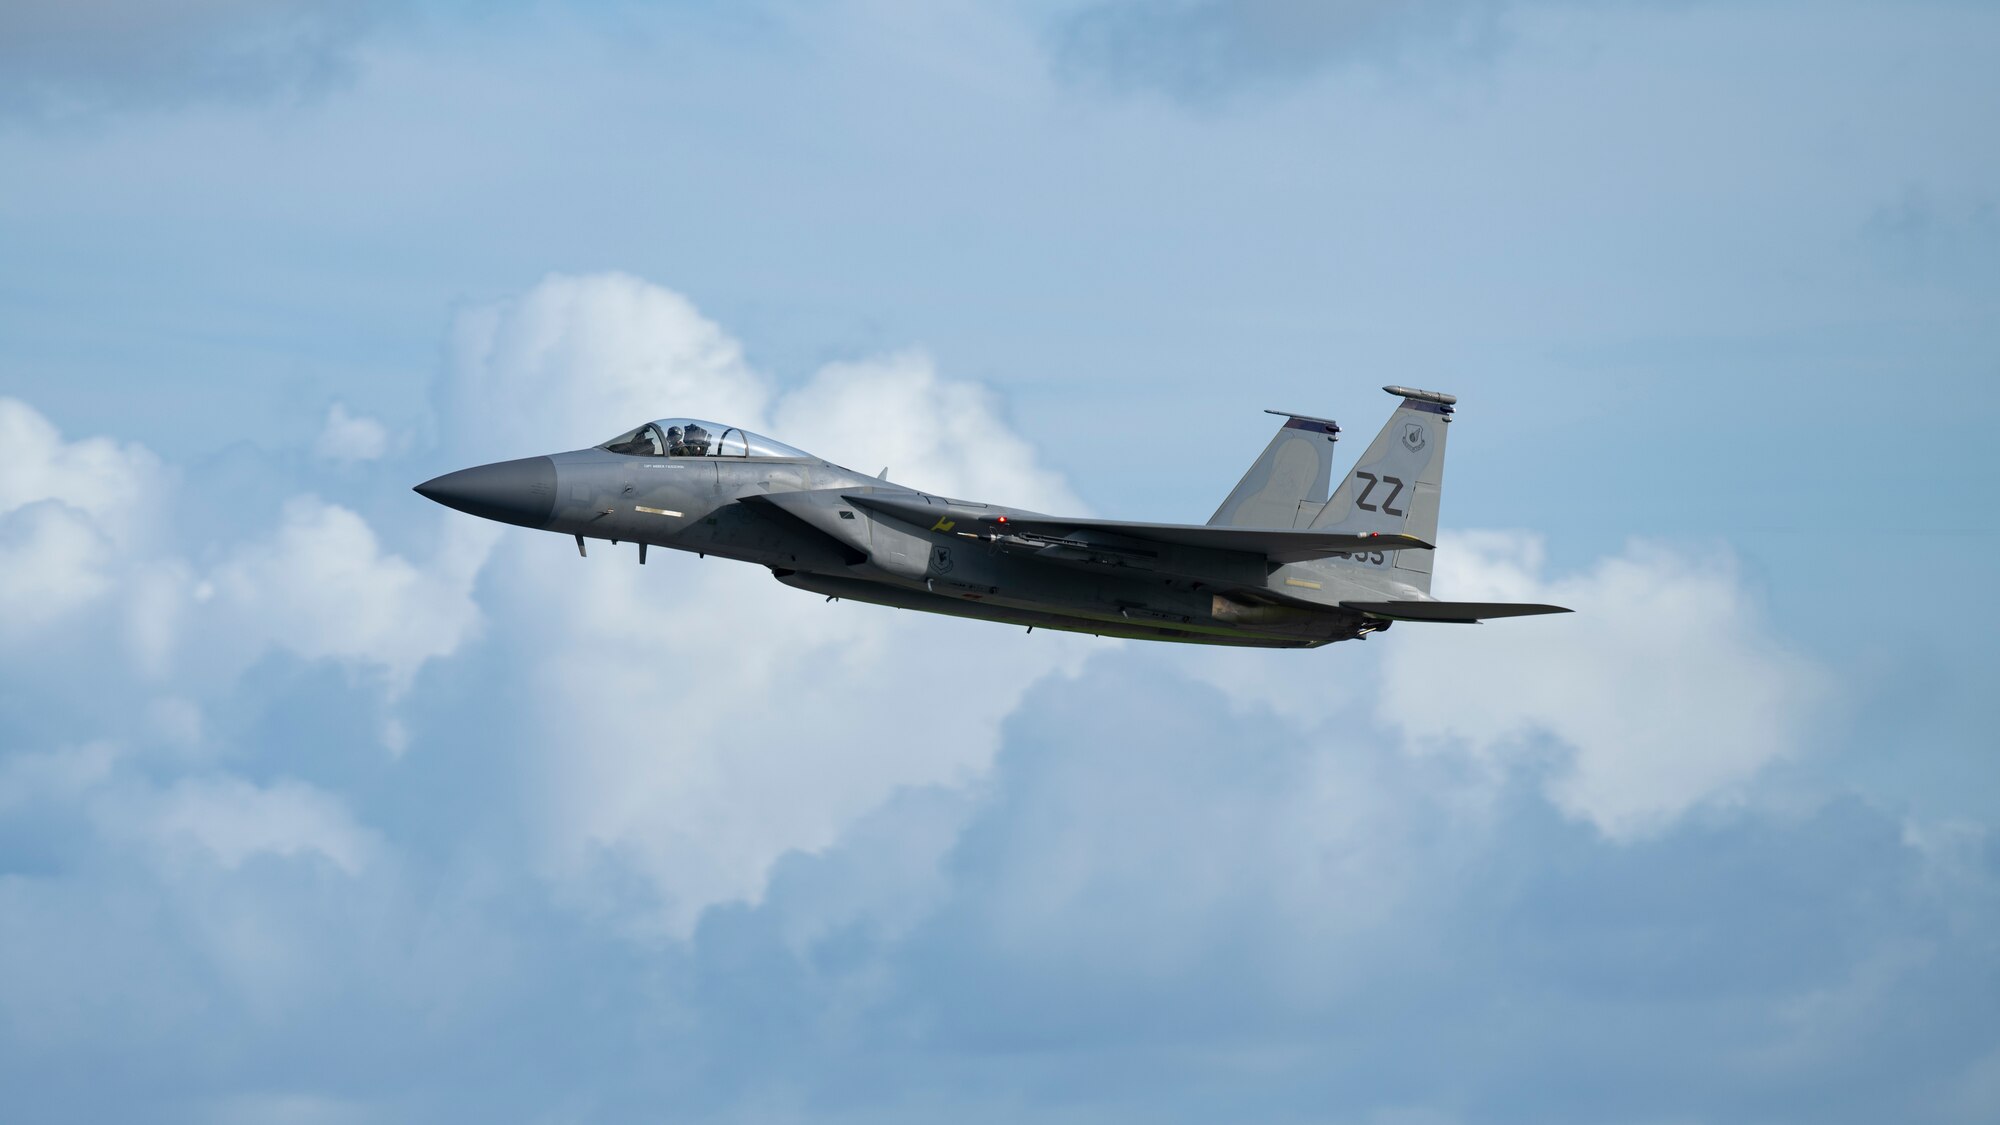 An F-15C Eagle assigned to the 44th Fighter Squadron flies overhead in support of surge operations at Kadena Air Base, Japan, Aug. 24, 2022. Surge operations provide aircrew and support personnel the opportunity to train the skills necessary to maintain a ready force, capable of ensuring the collective defense of the Indo-Pacific region. (U.S. Air Force photo by Senior Airman Jessi Roth)